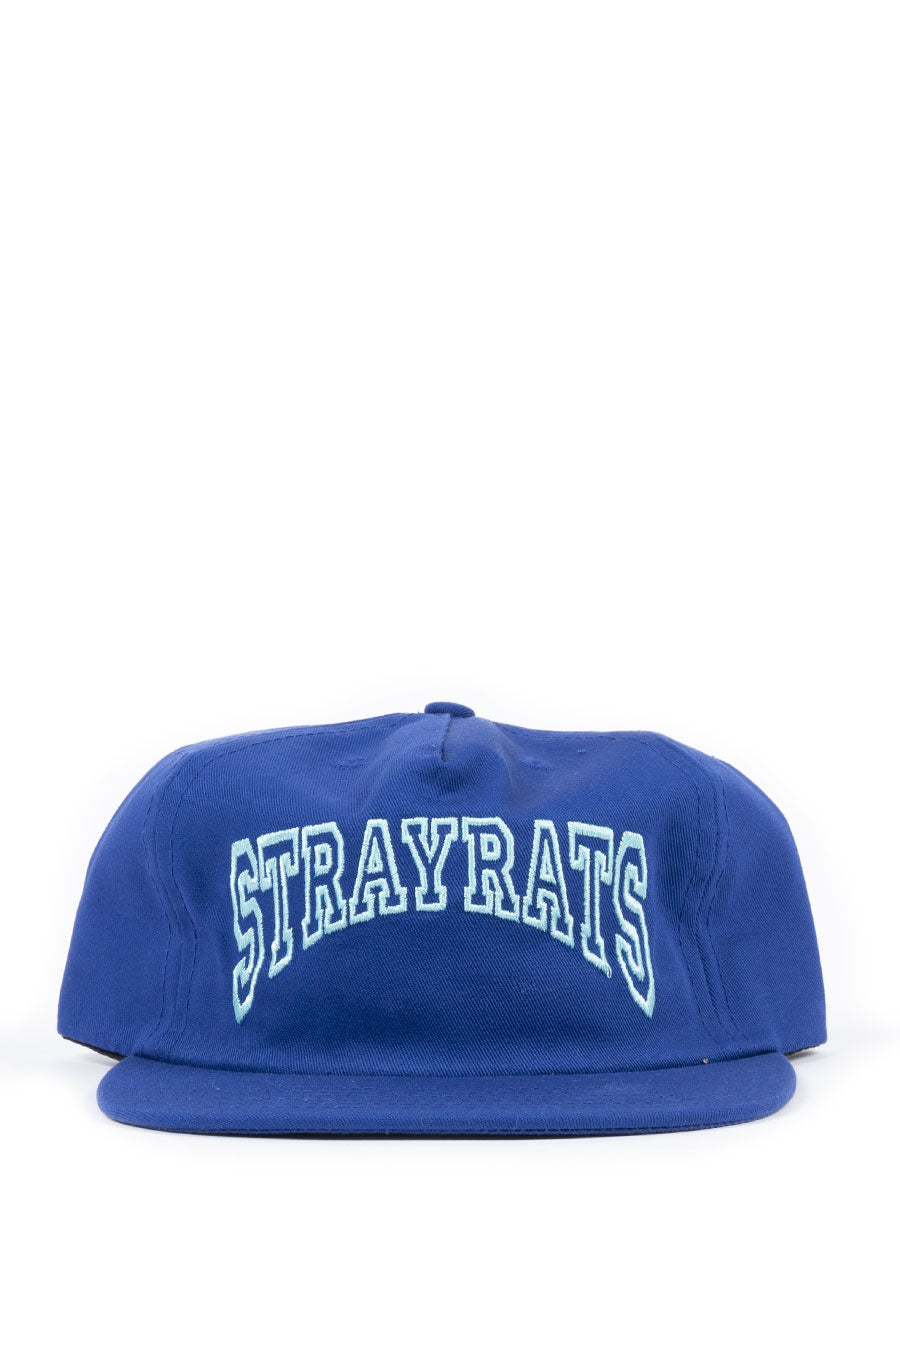 STRAY RATS COLLEGE ARCH LOGO HAT BLUE